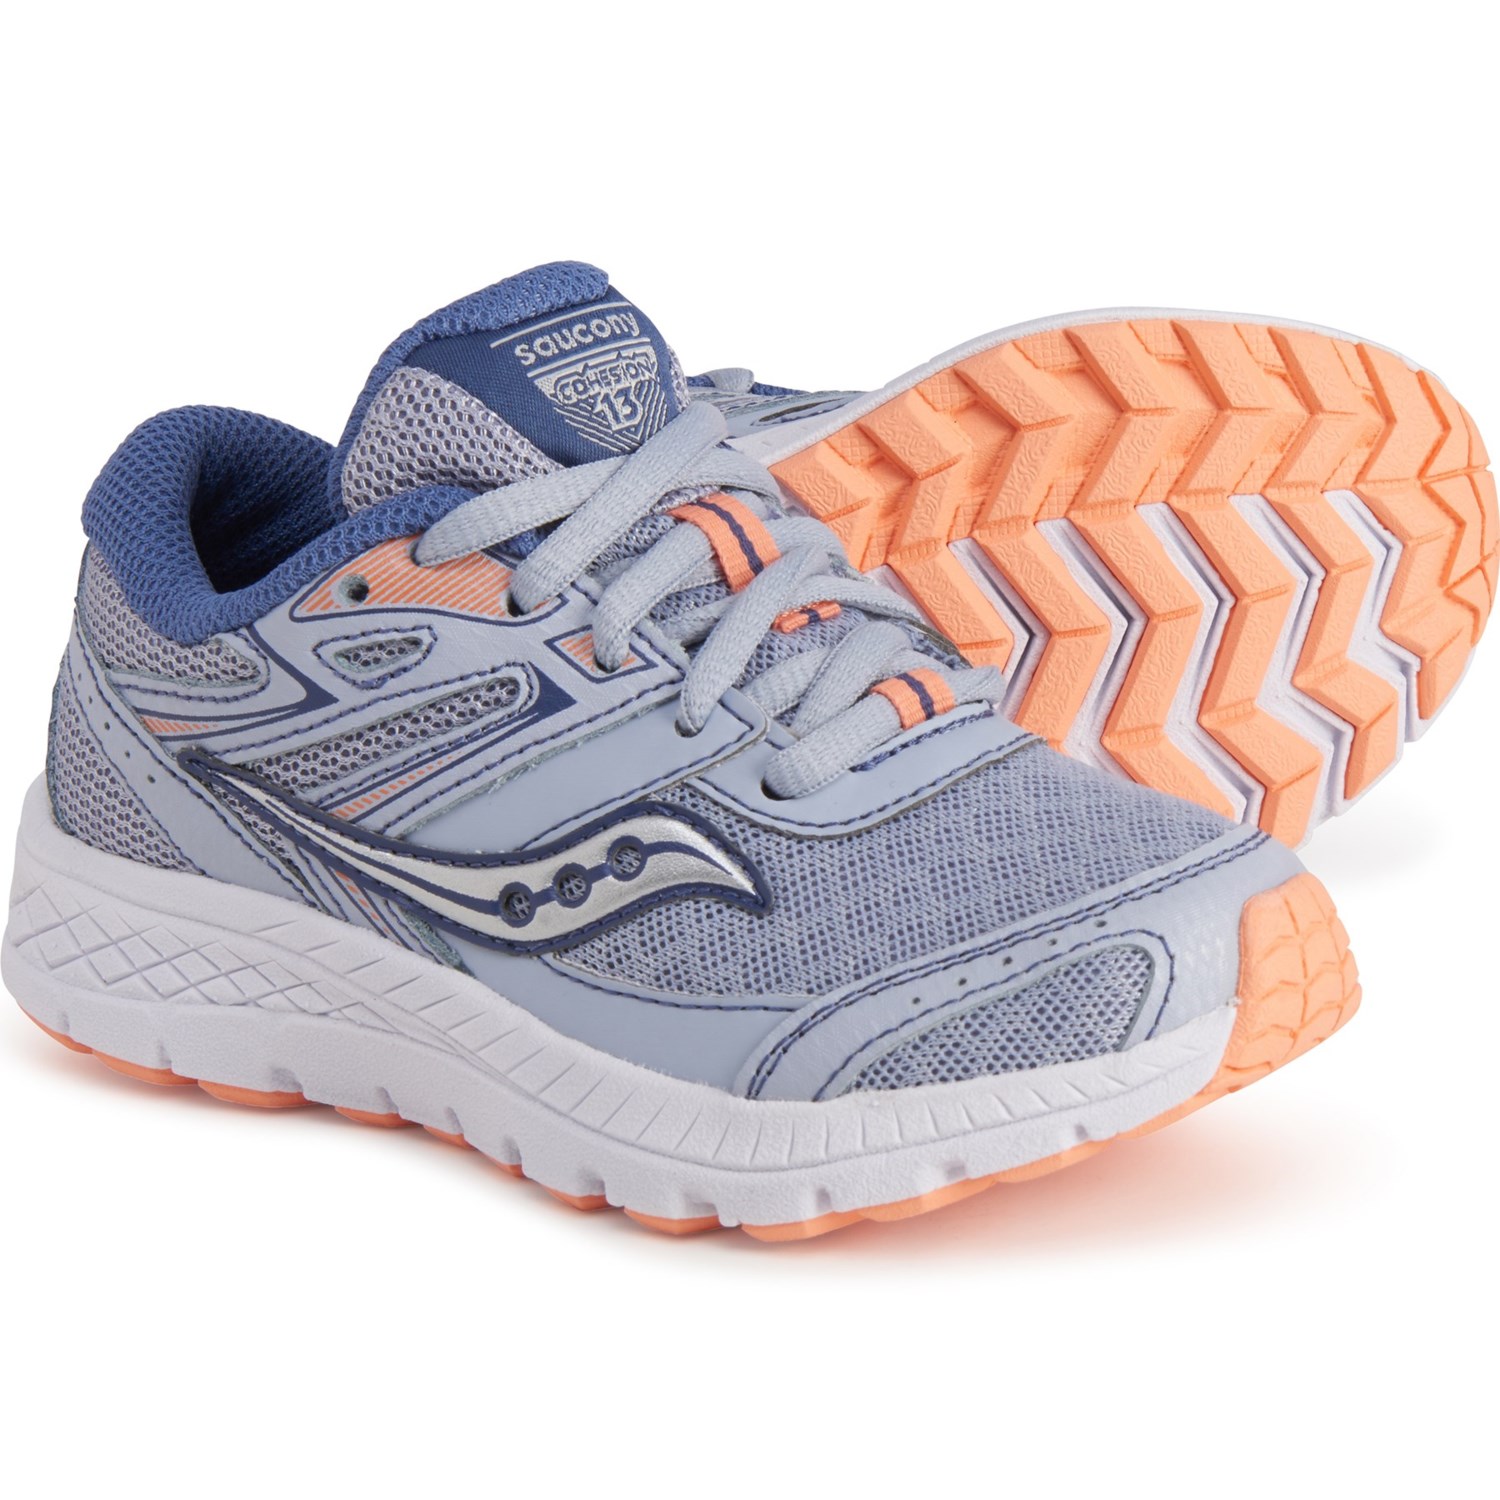 Saucony Cohesion 13 LTT Running Shoes 